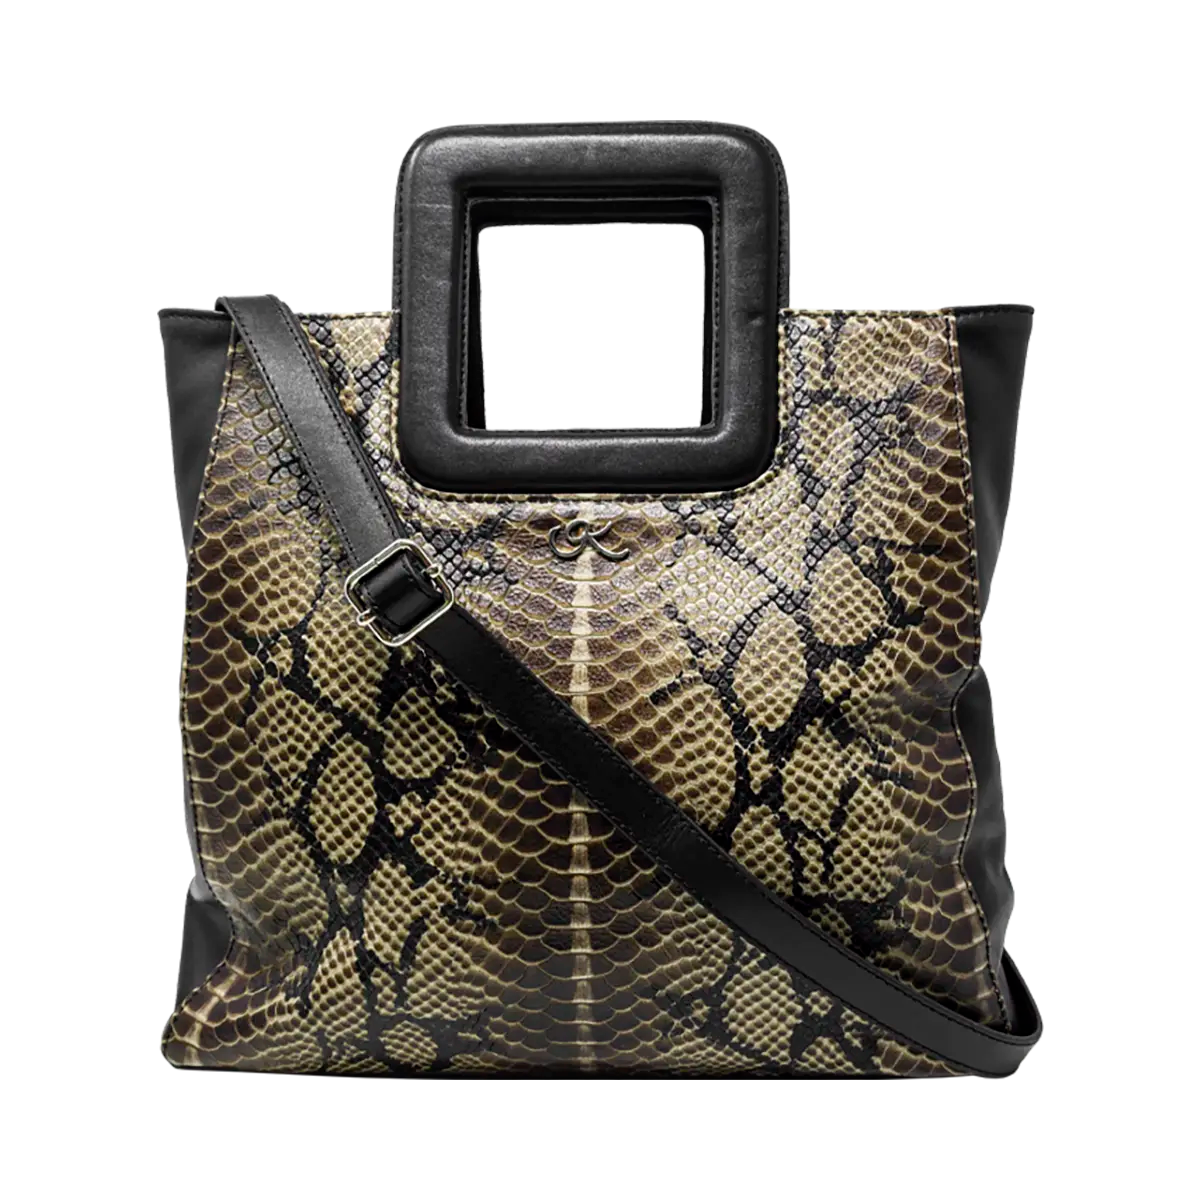 large black tan print leather print handbag with a square handle. Accessory for women in San Diego, CA.